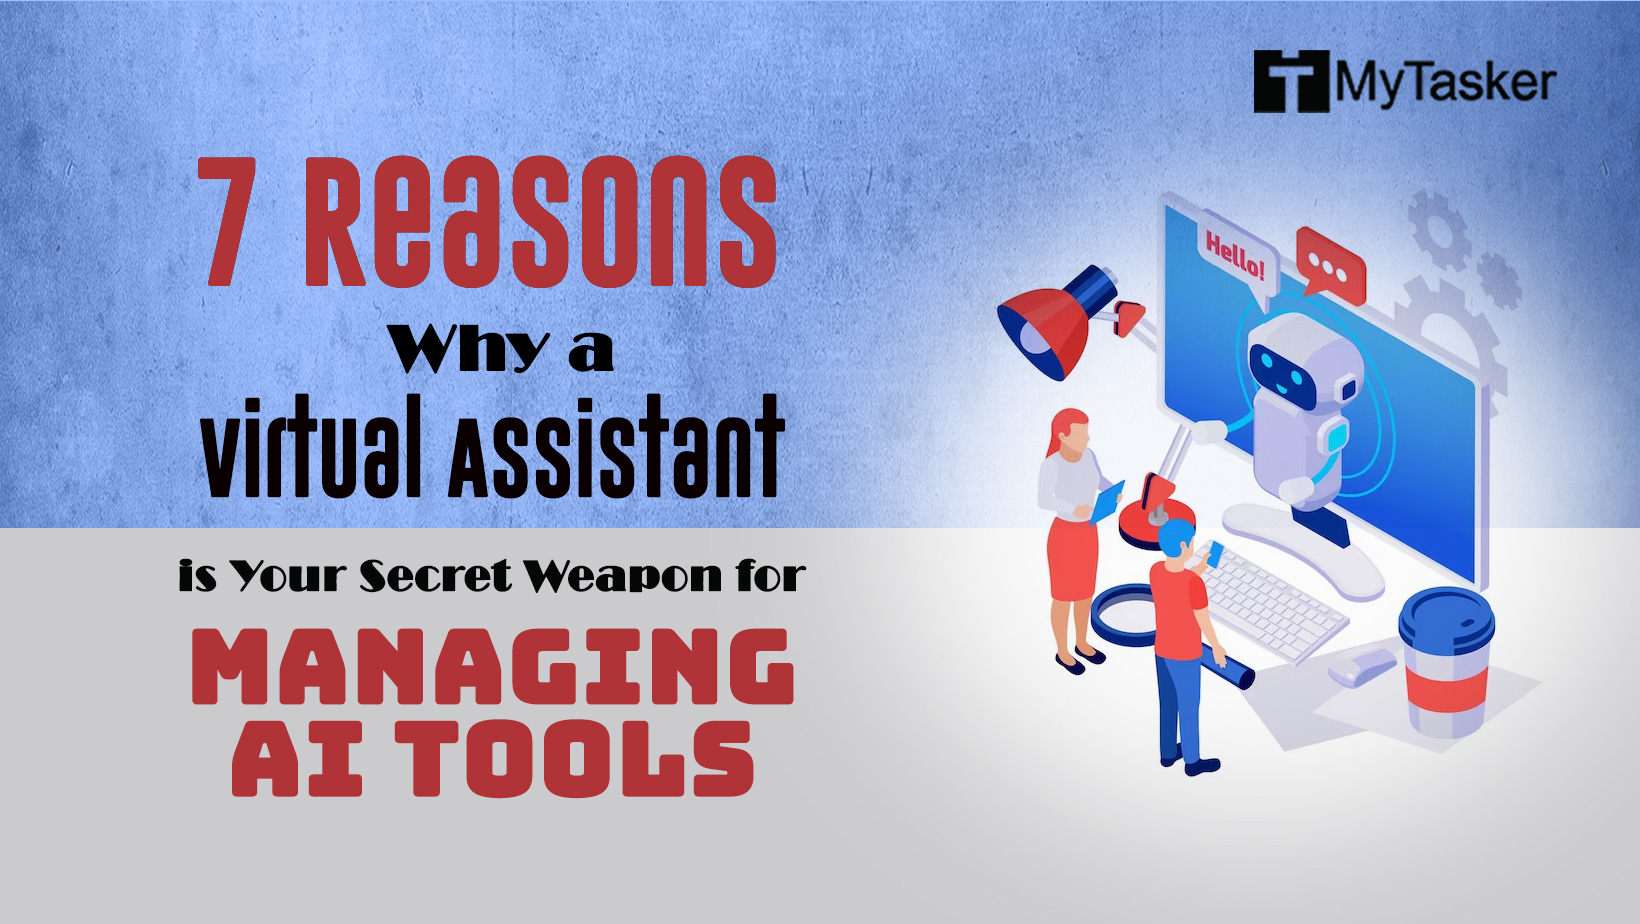 7 Reasons Why a Virtual Assistant is Your Secret Weapon for Managing AI Tools